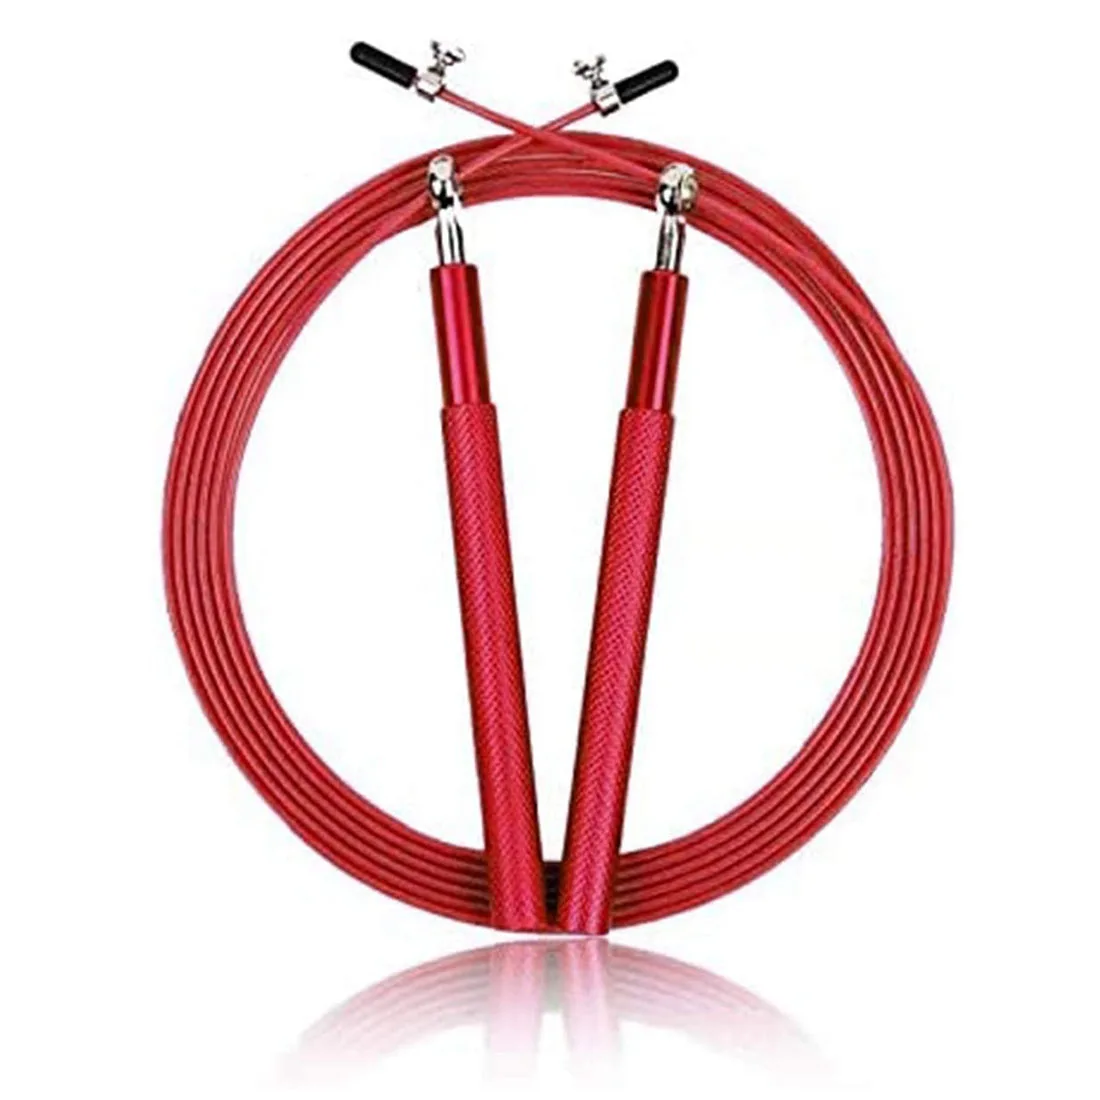 

Skipping Rope Speed Jump Rope Crossfit Ball Bearing Rapid Cable Fitness Exercise Workout Equipment for Martial Arts Training